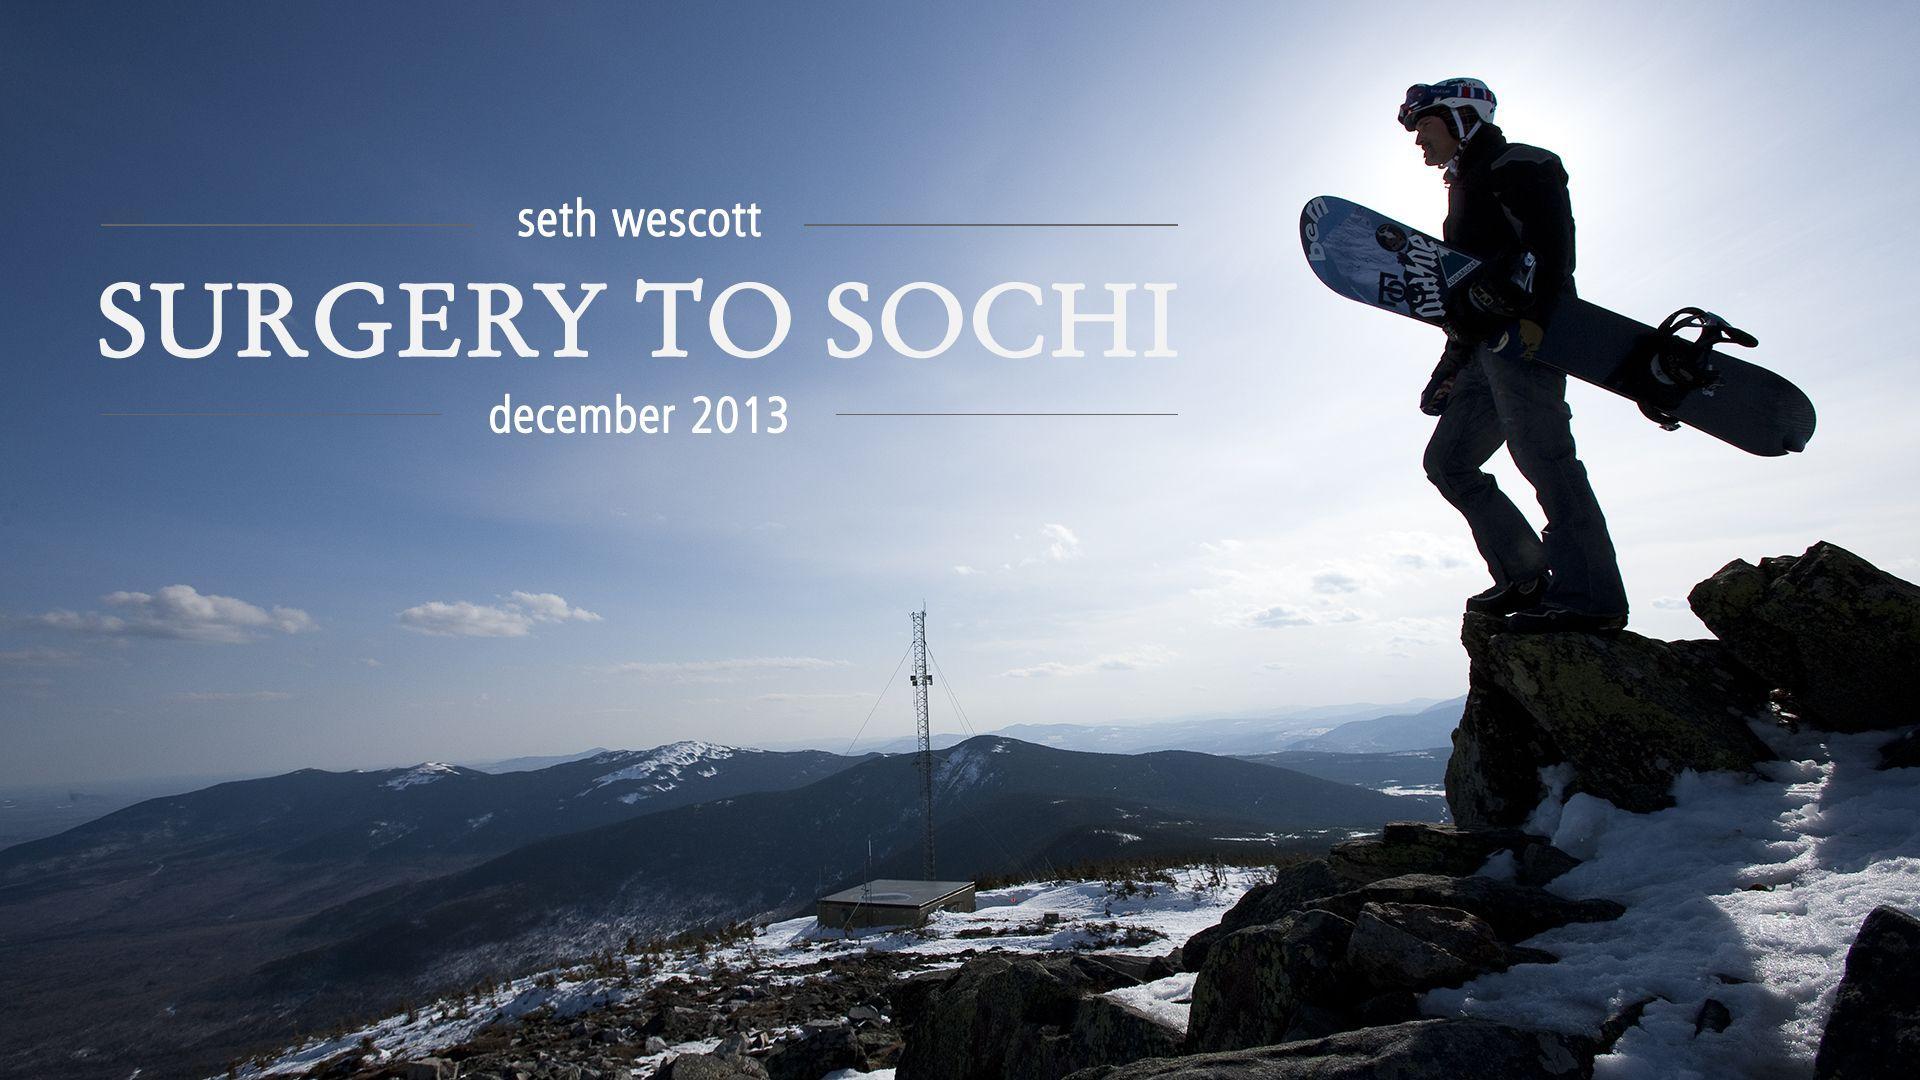 Athlete in in Sochi in 2014 mountains wallpaper and image